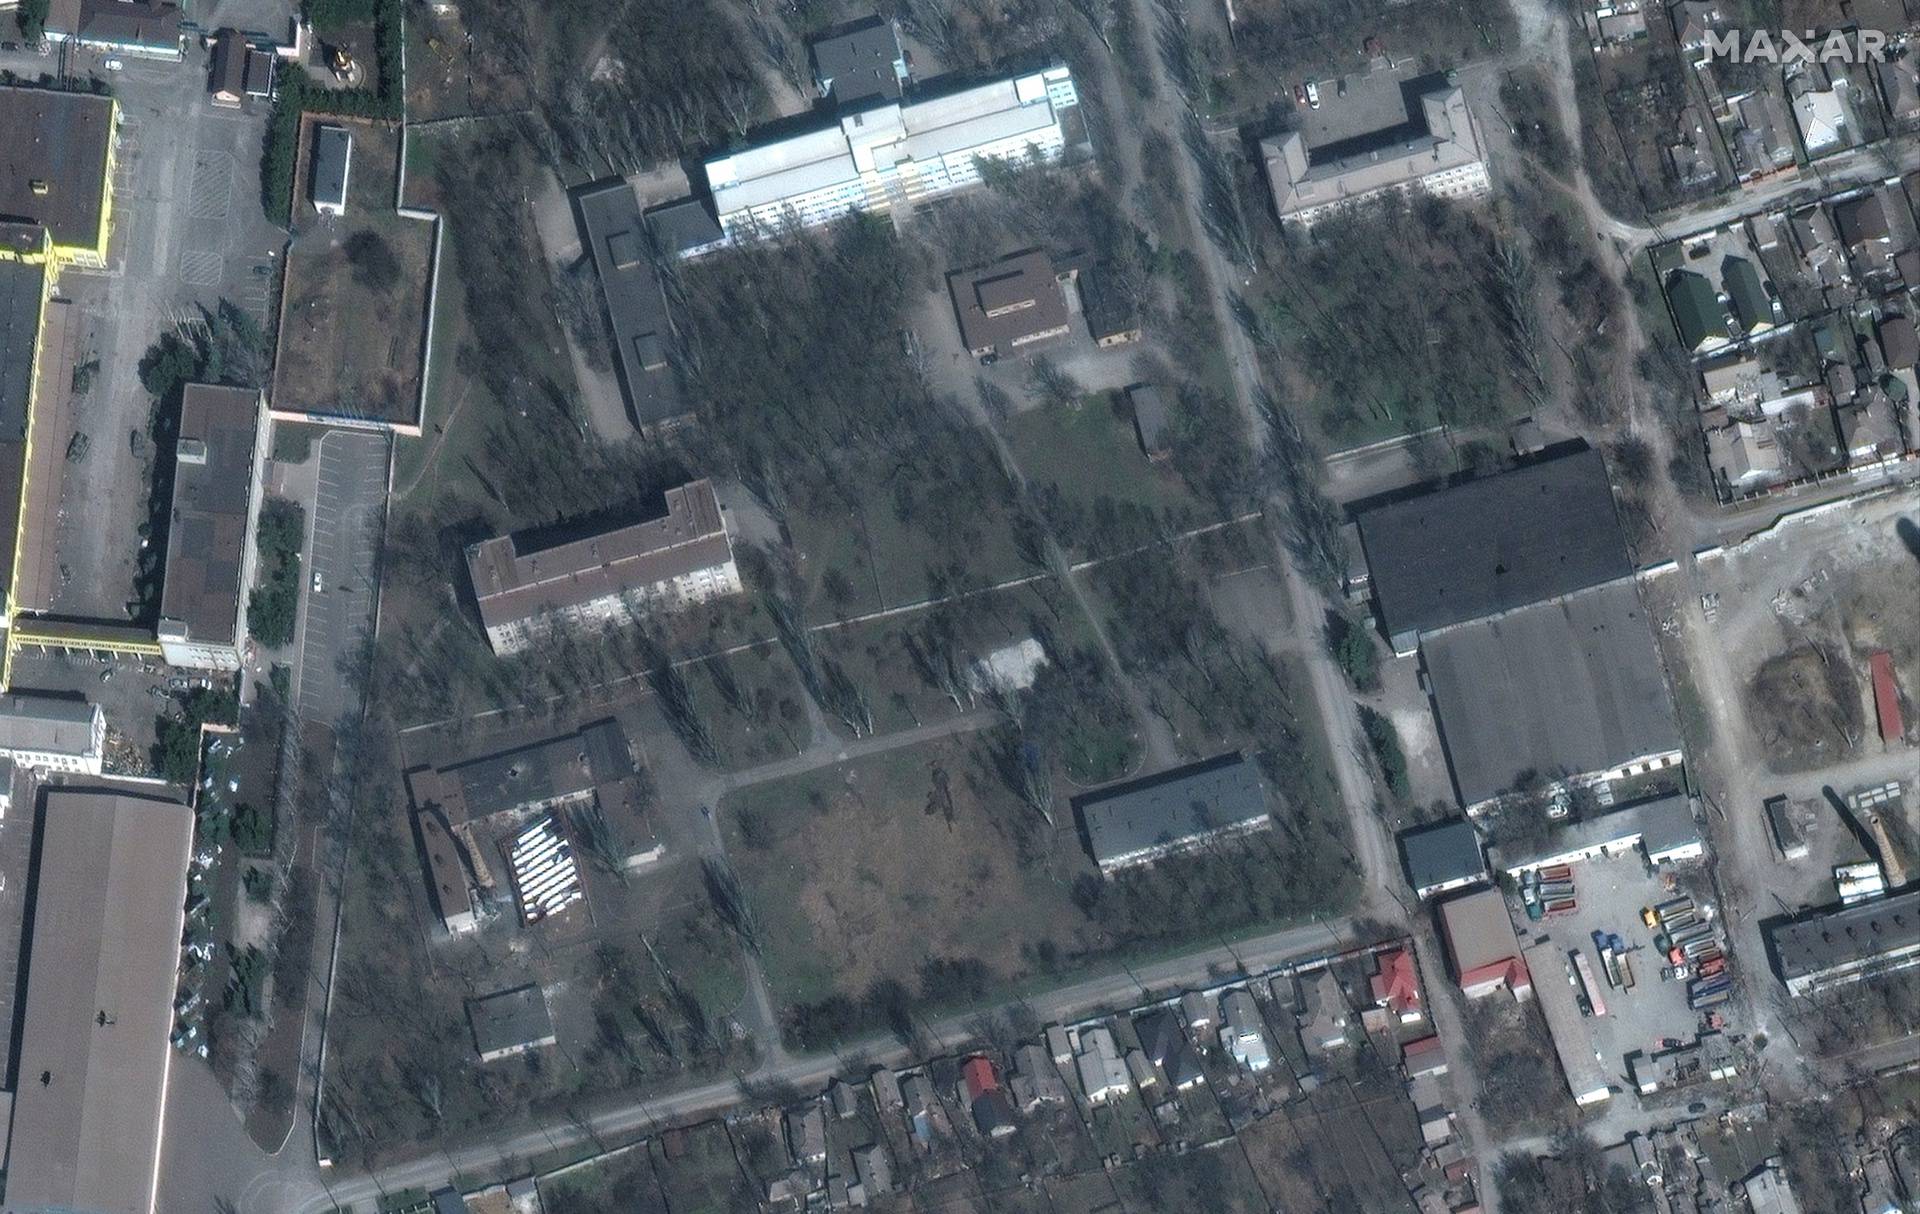 A satellite image shows a view before the construction of a new Russian military facility in Mariupol